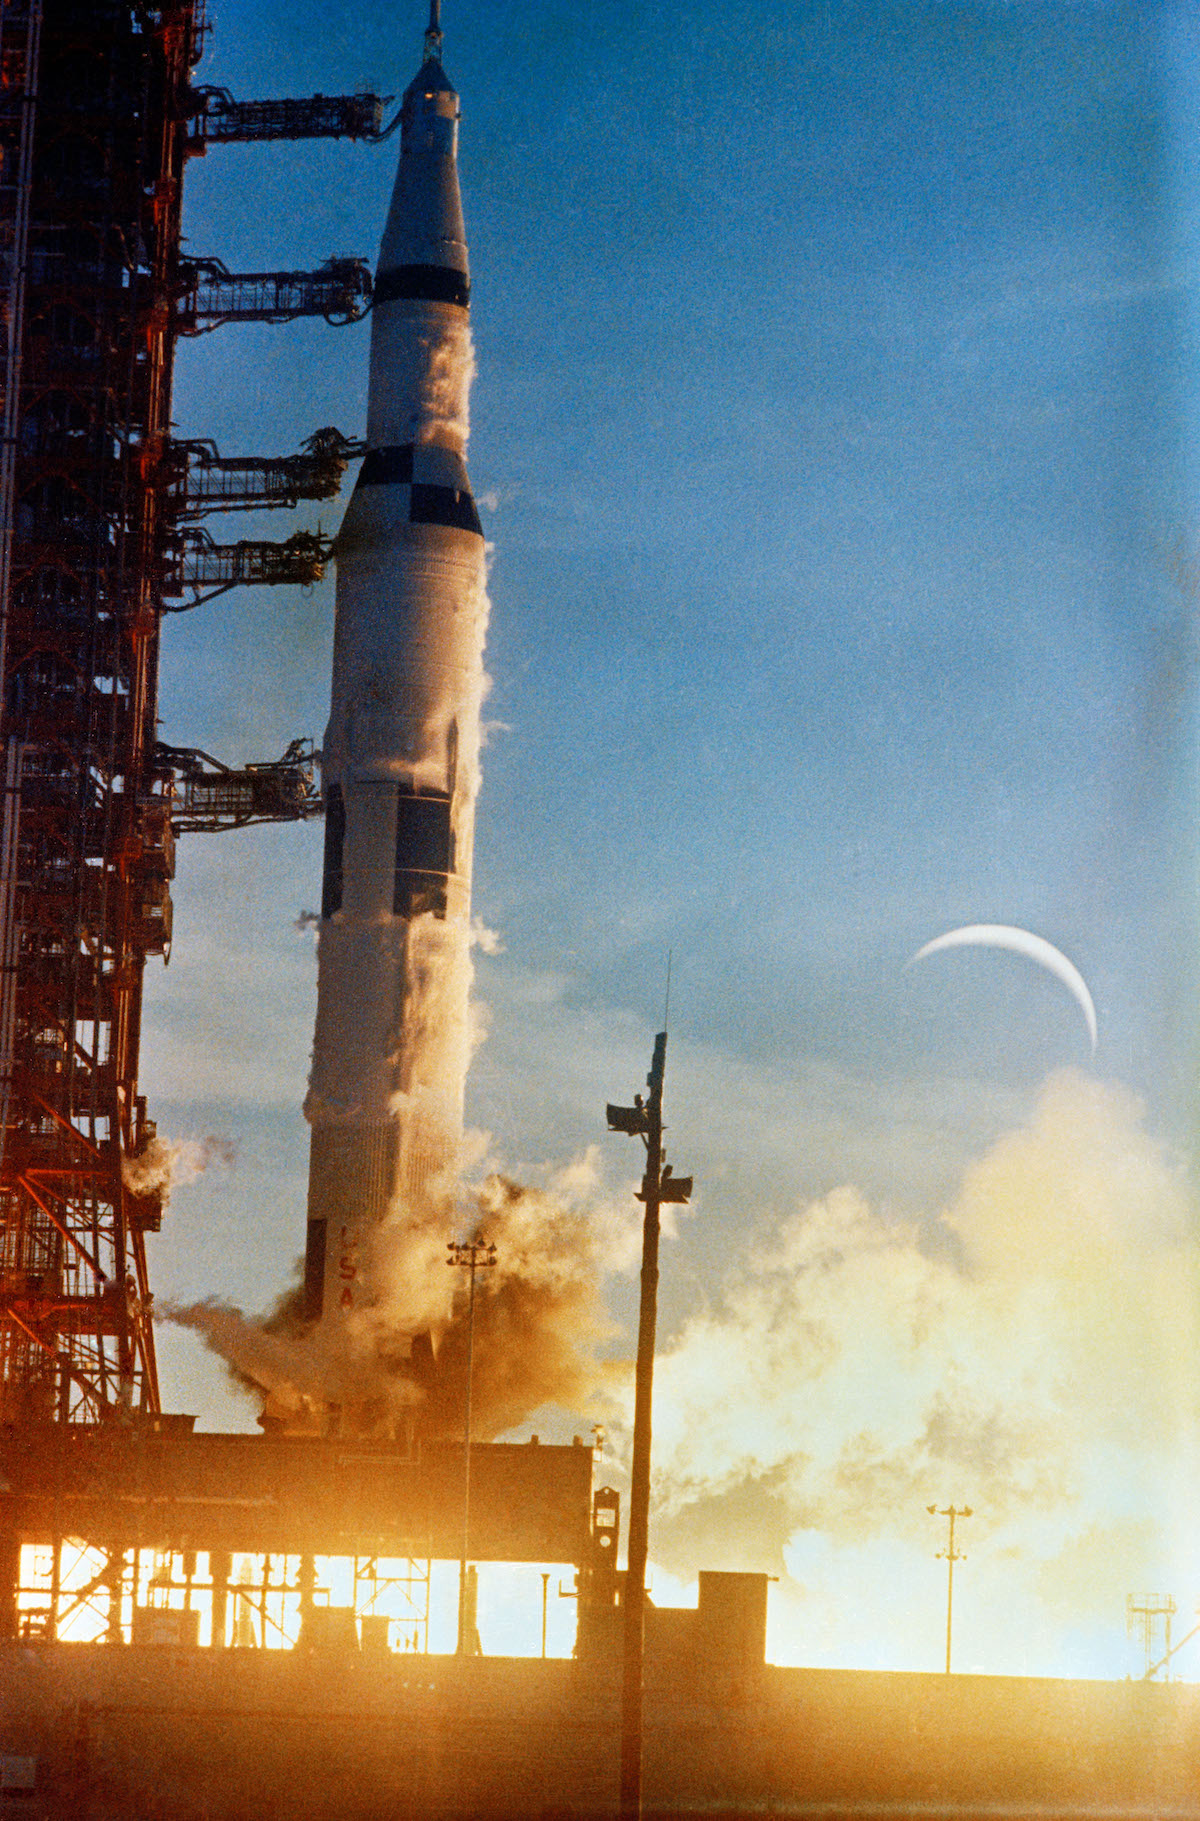 Saturn V rocket launches with great flames, with the Moon in the sky in the background